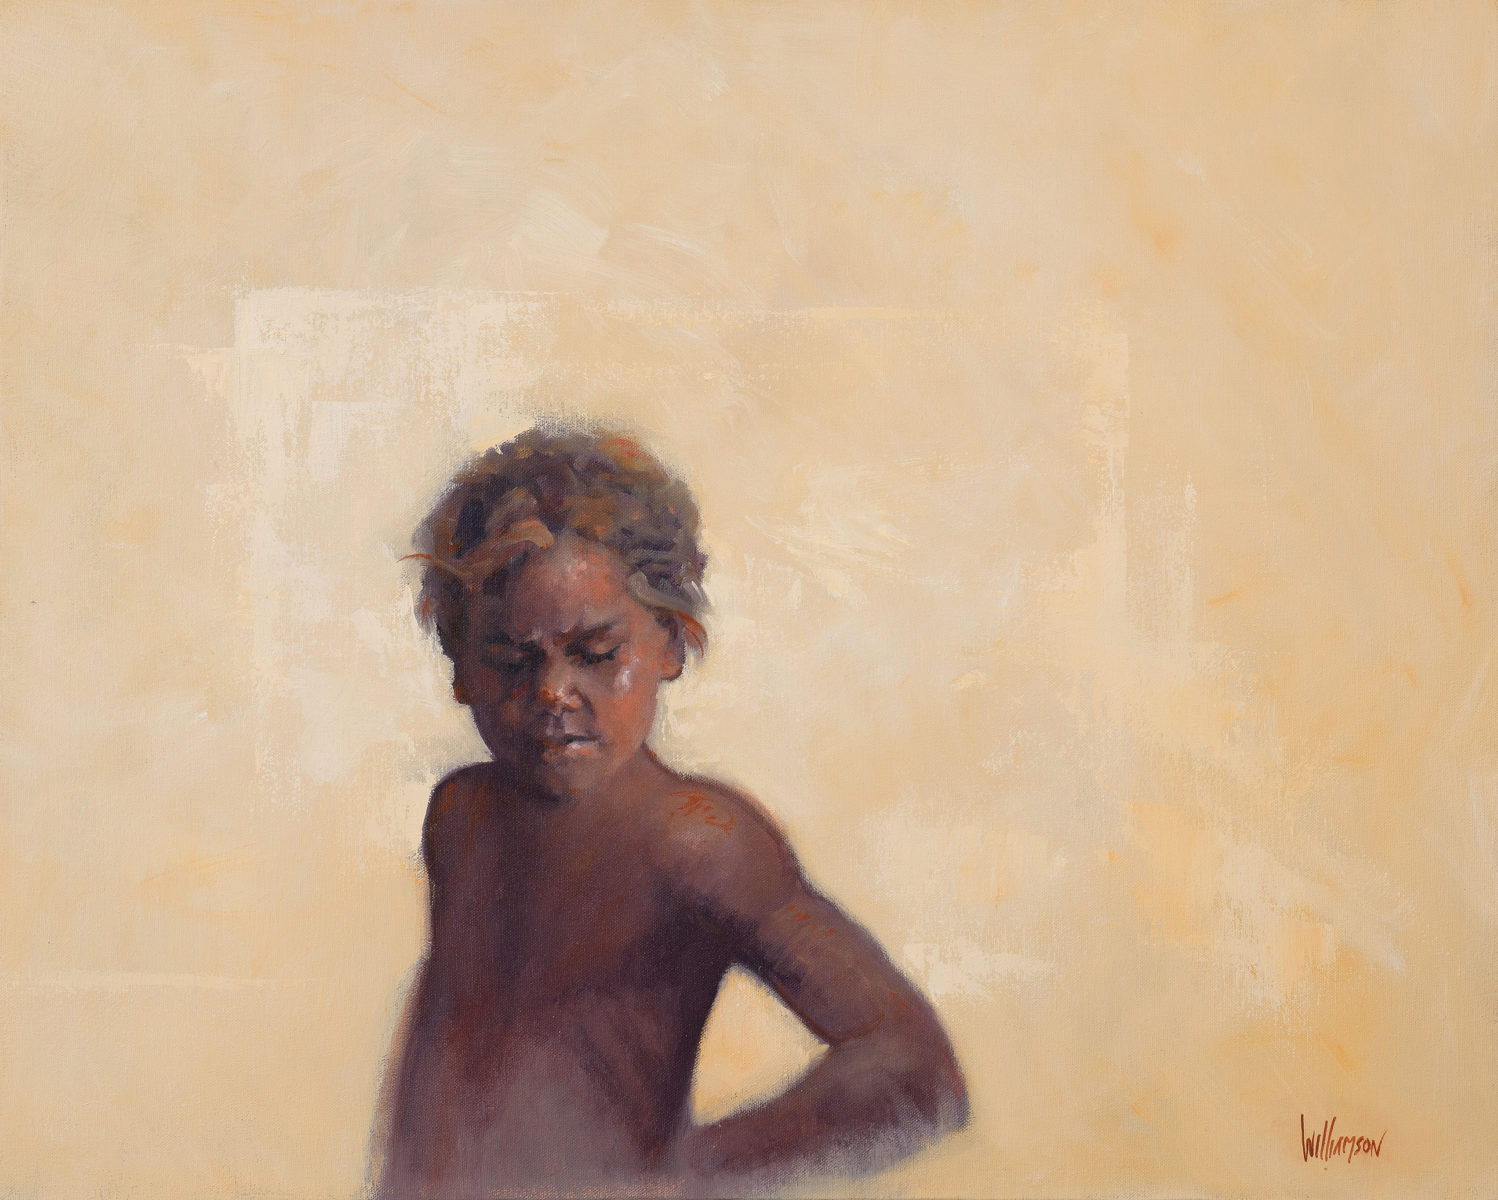 Young Boy | Jan Williamson | Oil on canvas | 61 x 76 cm | SOLD